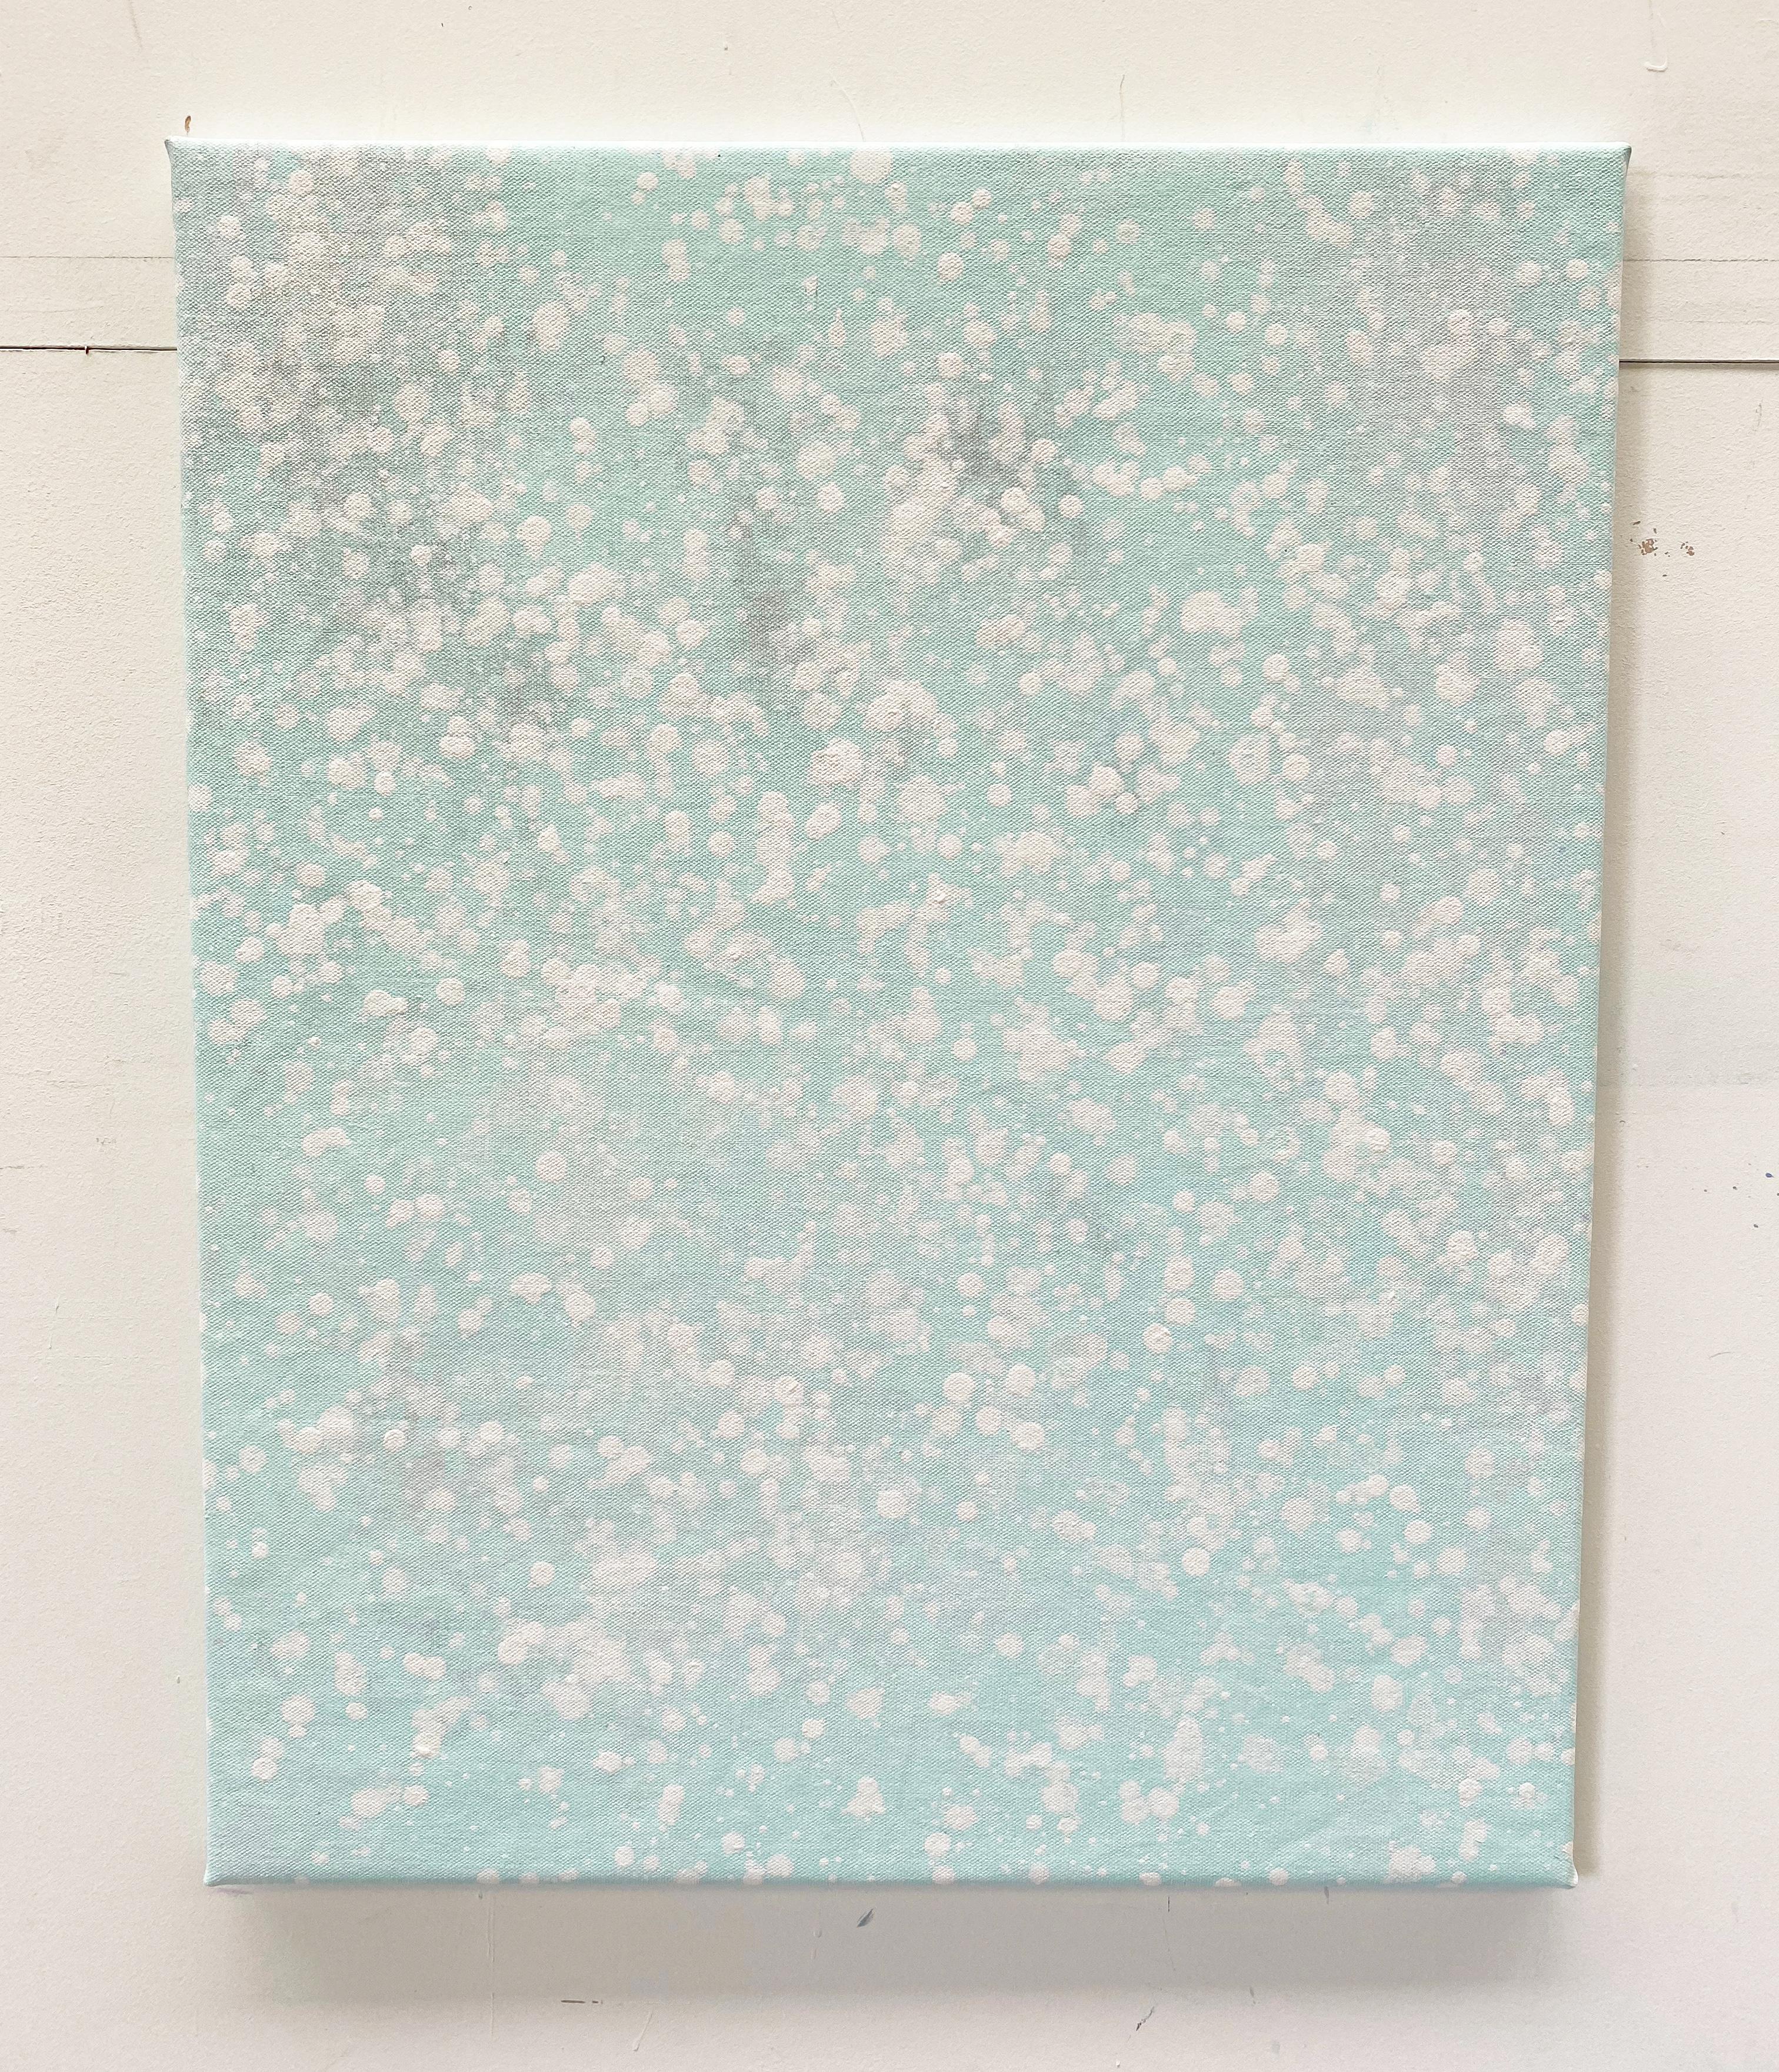 'Its snowing pastel green' is a small stylised abstract work striving for minimalism in soft peaceful pastel tones and delicate textures.

One of threes works in the 'It's Snowing Series' an abstract expressionist collection of paintings reflecting